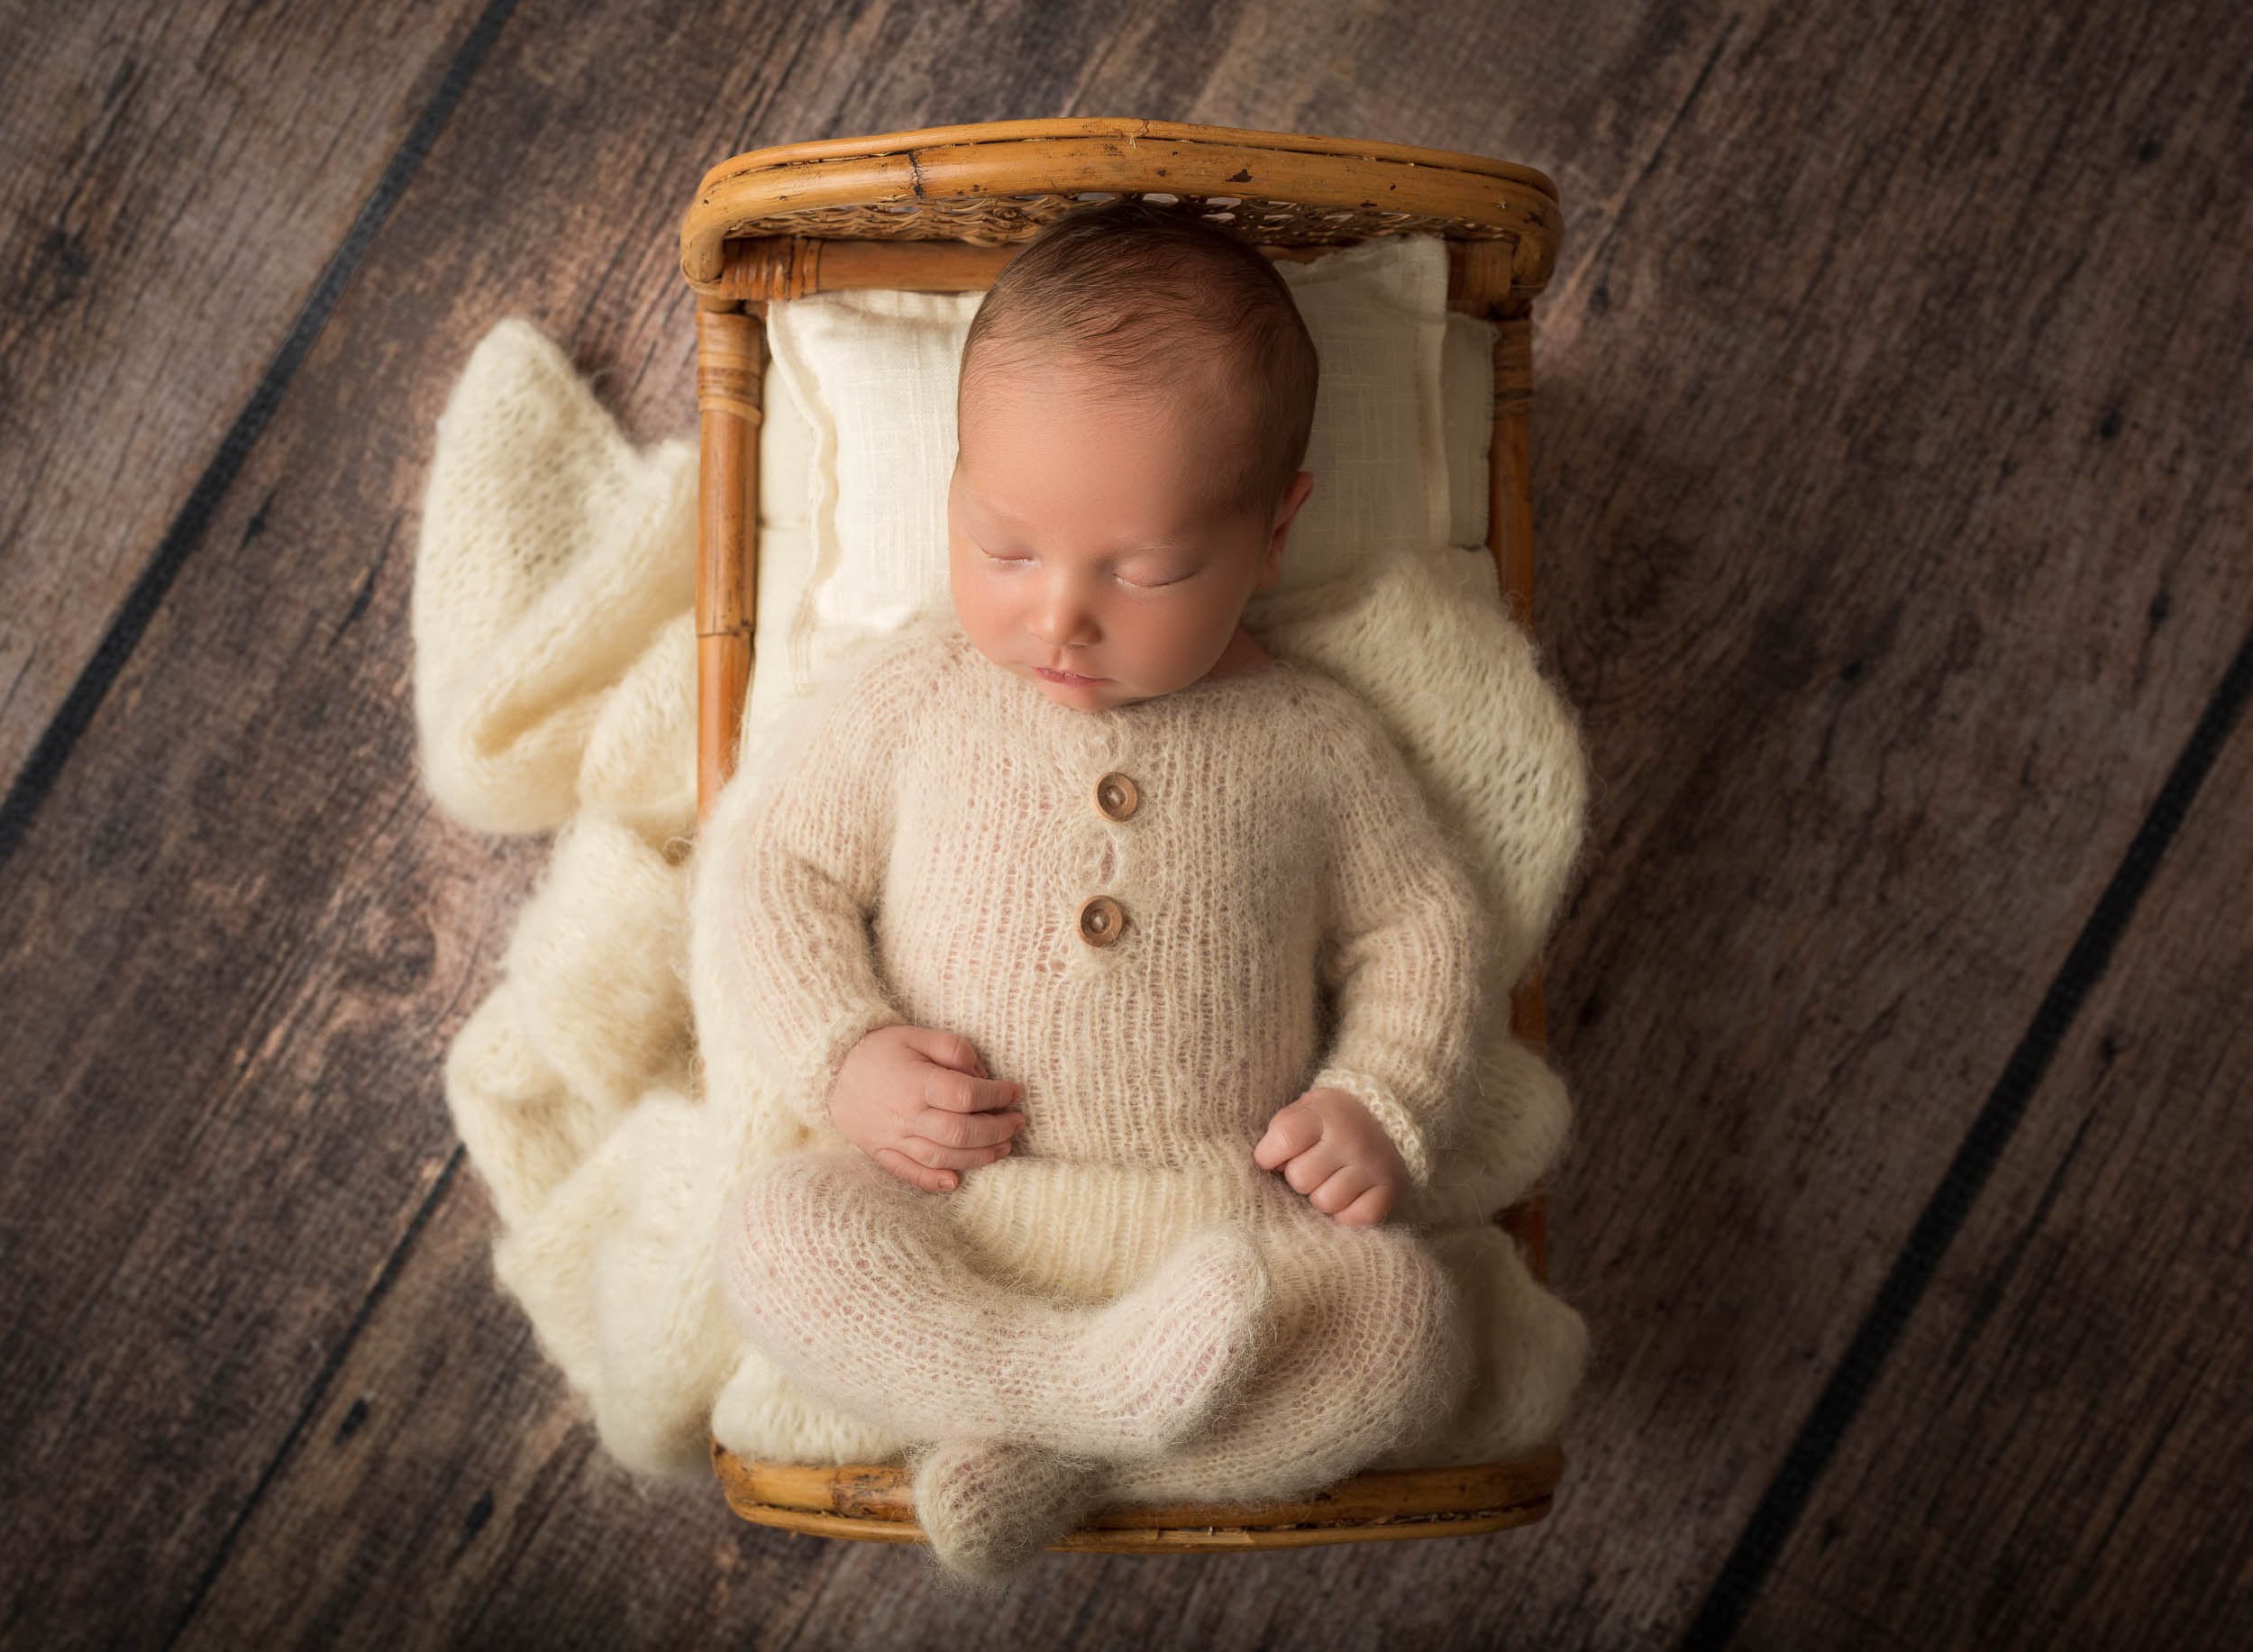 newborn boy in knit outfit laying on his back in baby bed